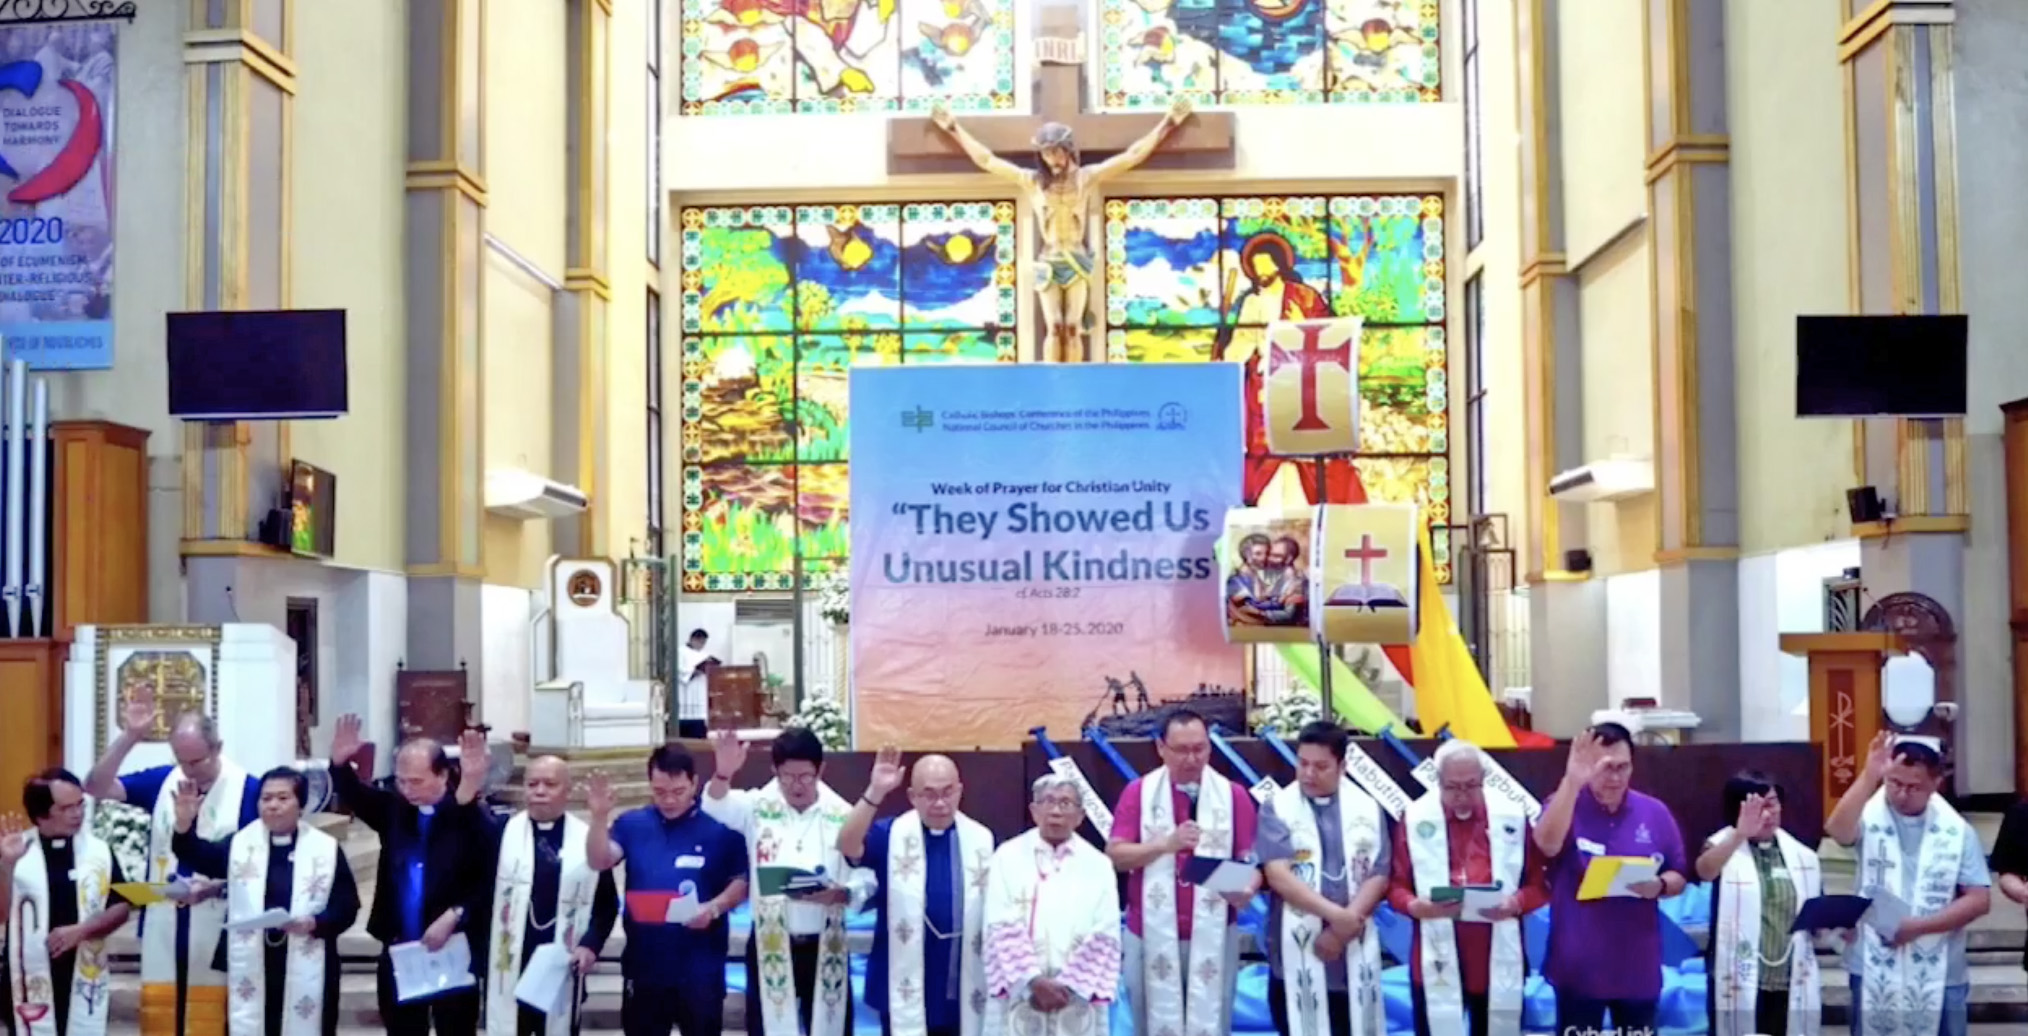 Christian churches reaffirm unity, solidarity | CBCPNews